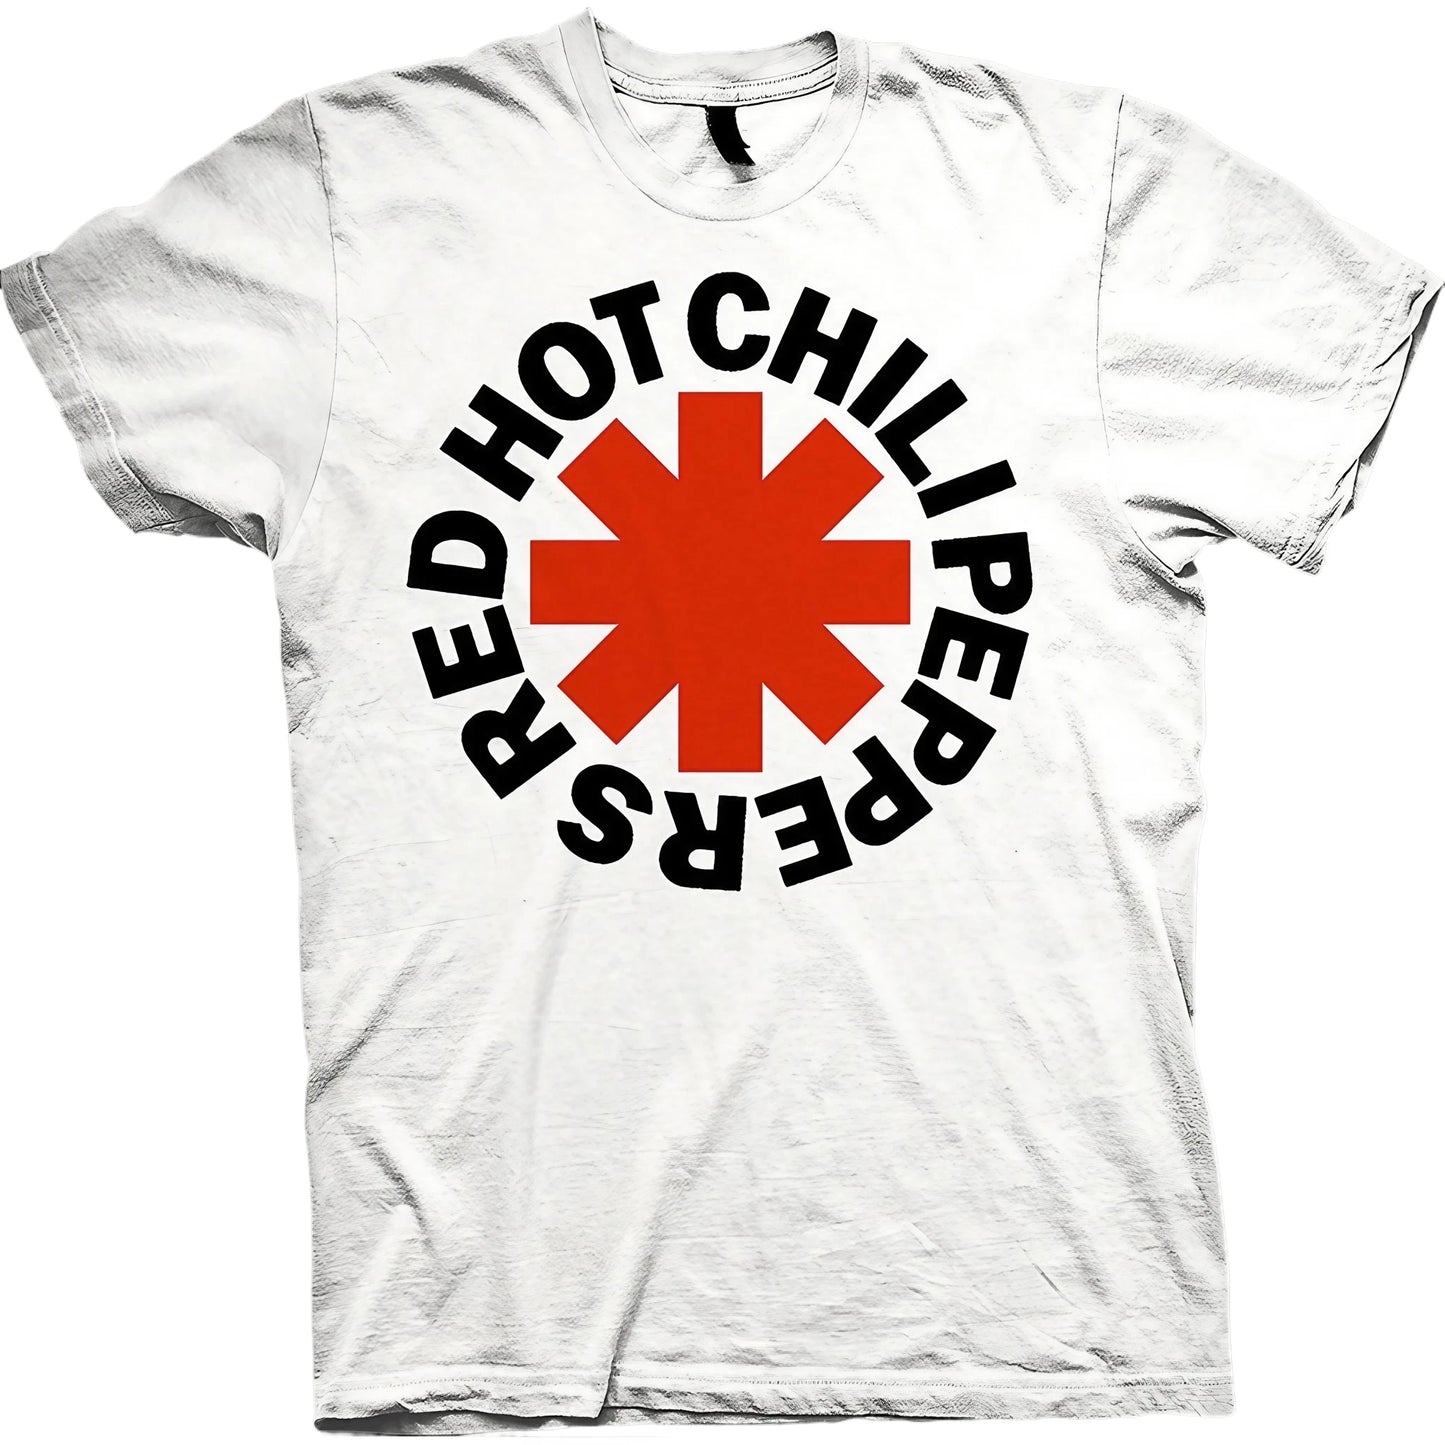 RED HOT CHILI PEPPERS - Red Asterisk White T-Shirt